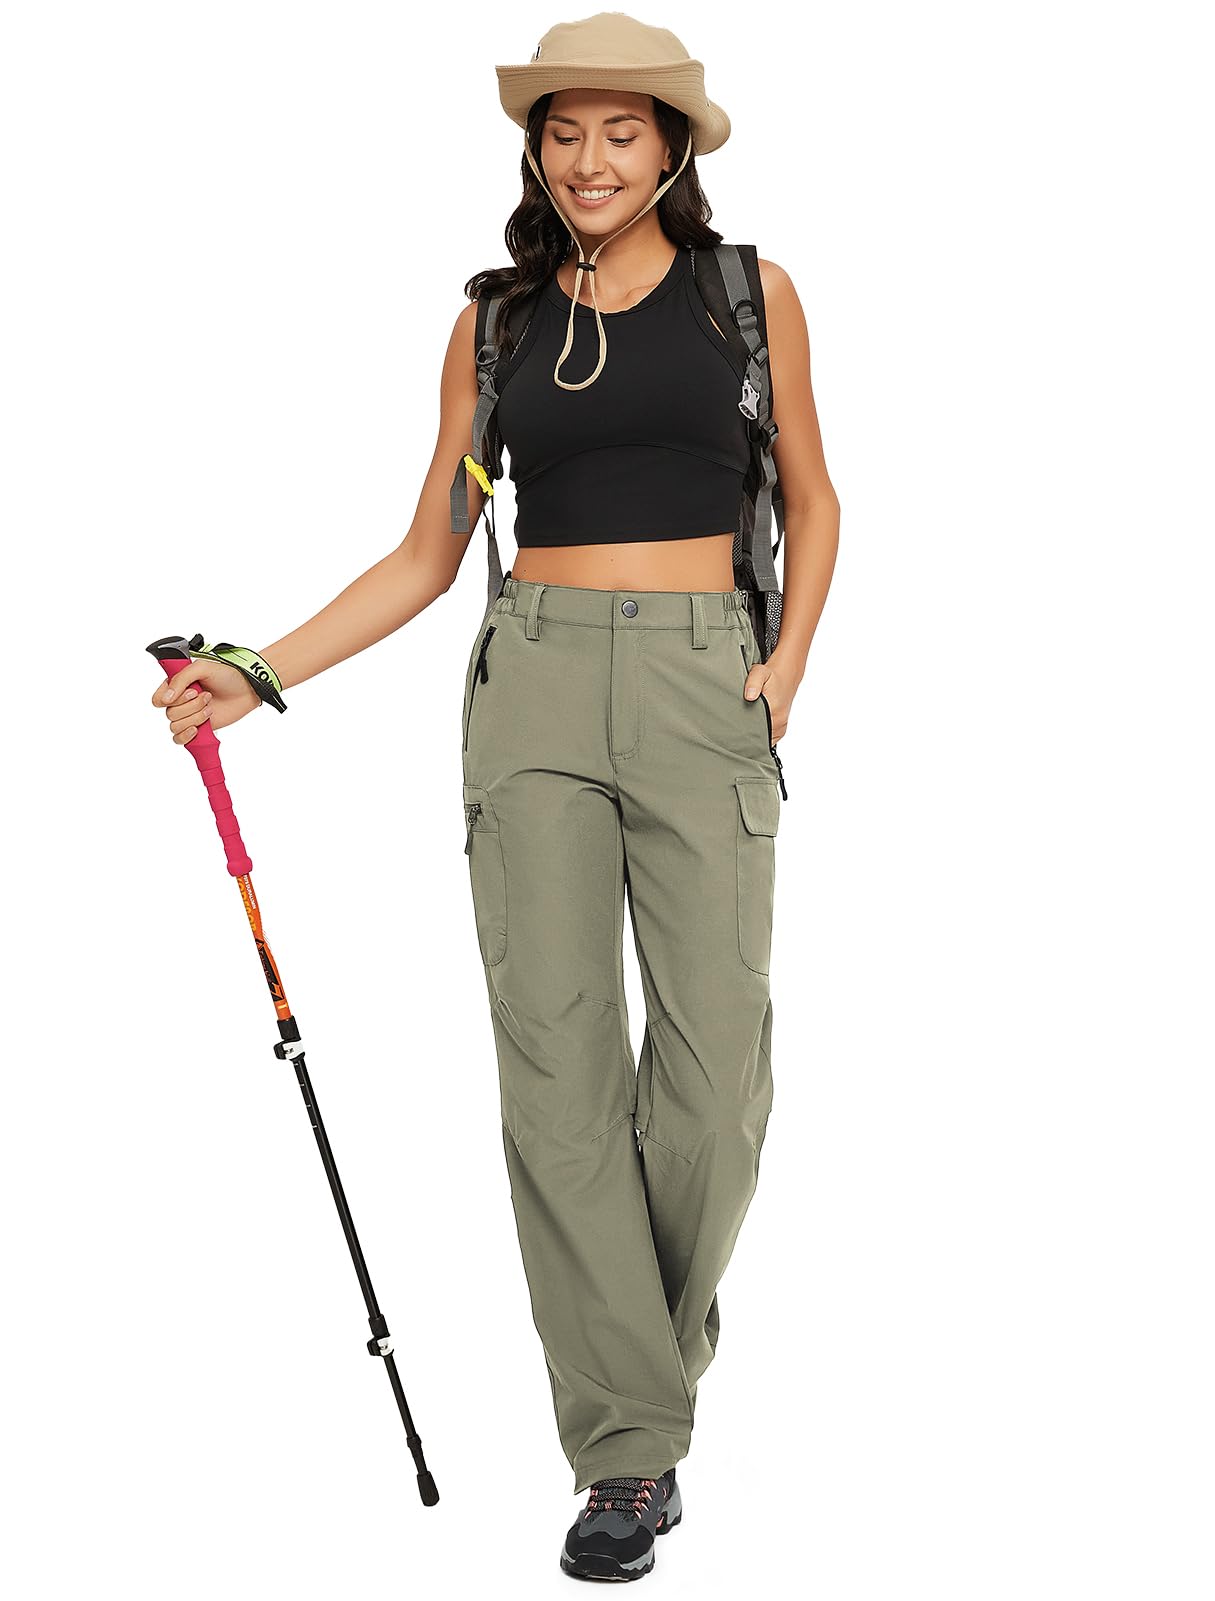 Women's Hiking Cargo Pants Quick Dry Water-Resistance High Waist Pants for Work Travel Outdoor and Casual